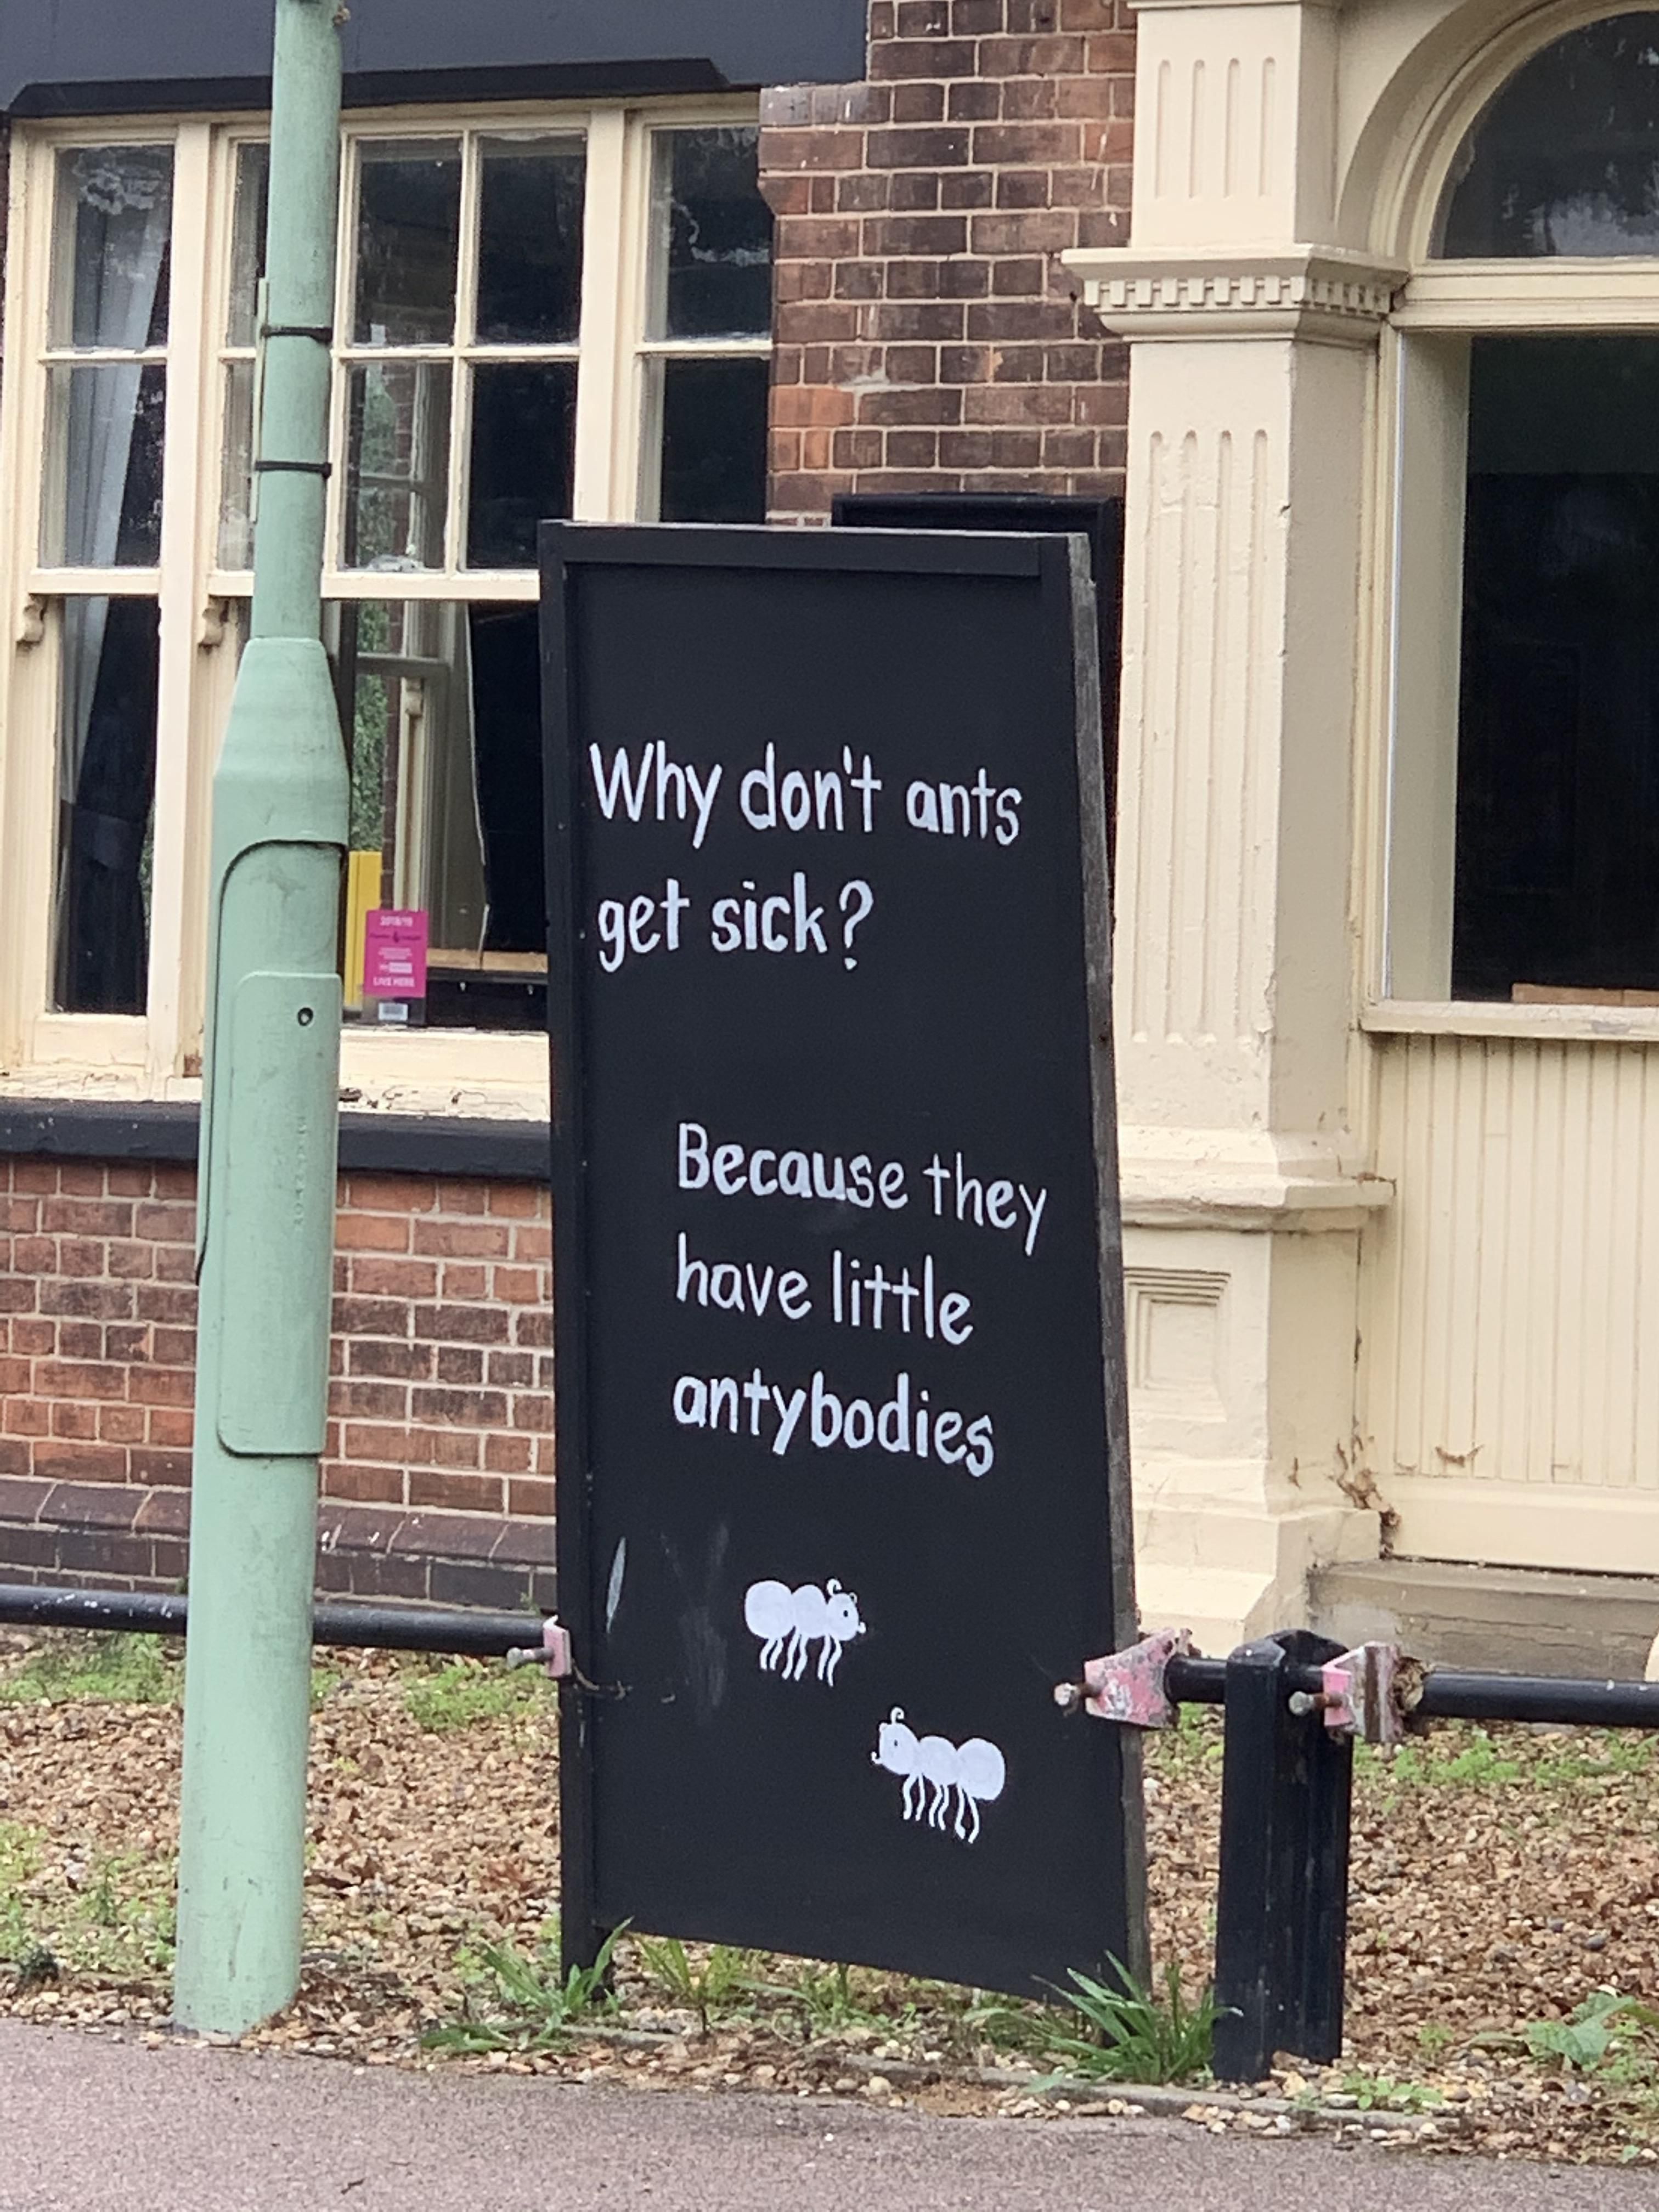 My local pub has banter, probably explains why ants don’t get Covid...